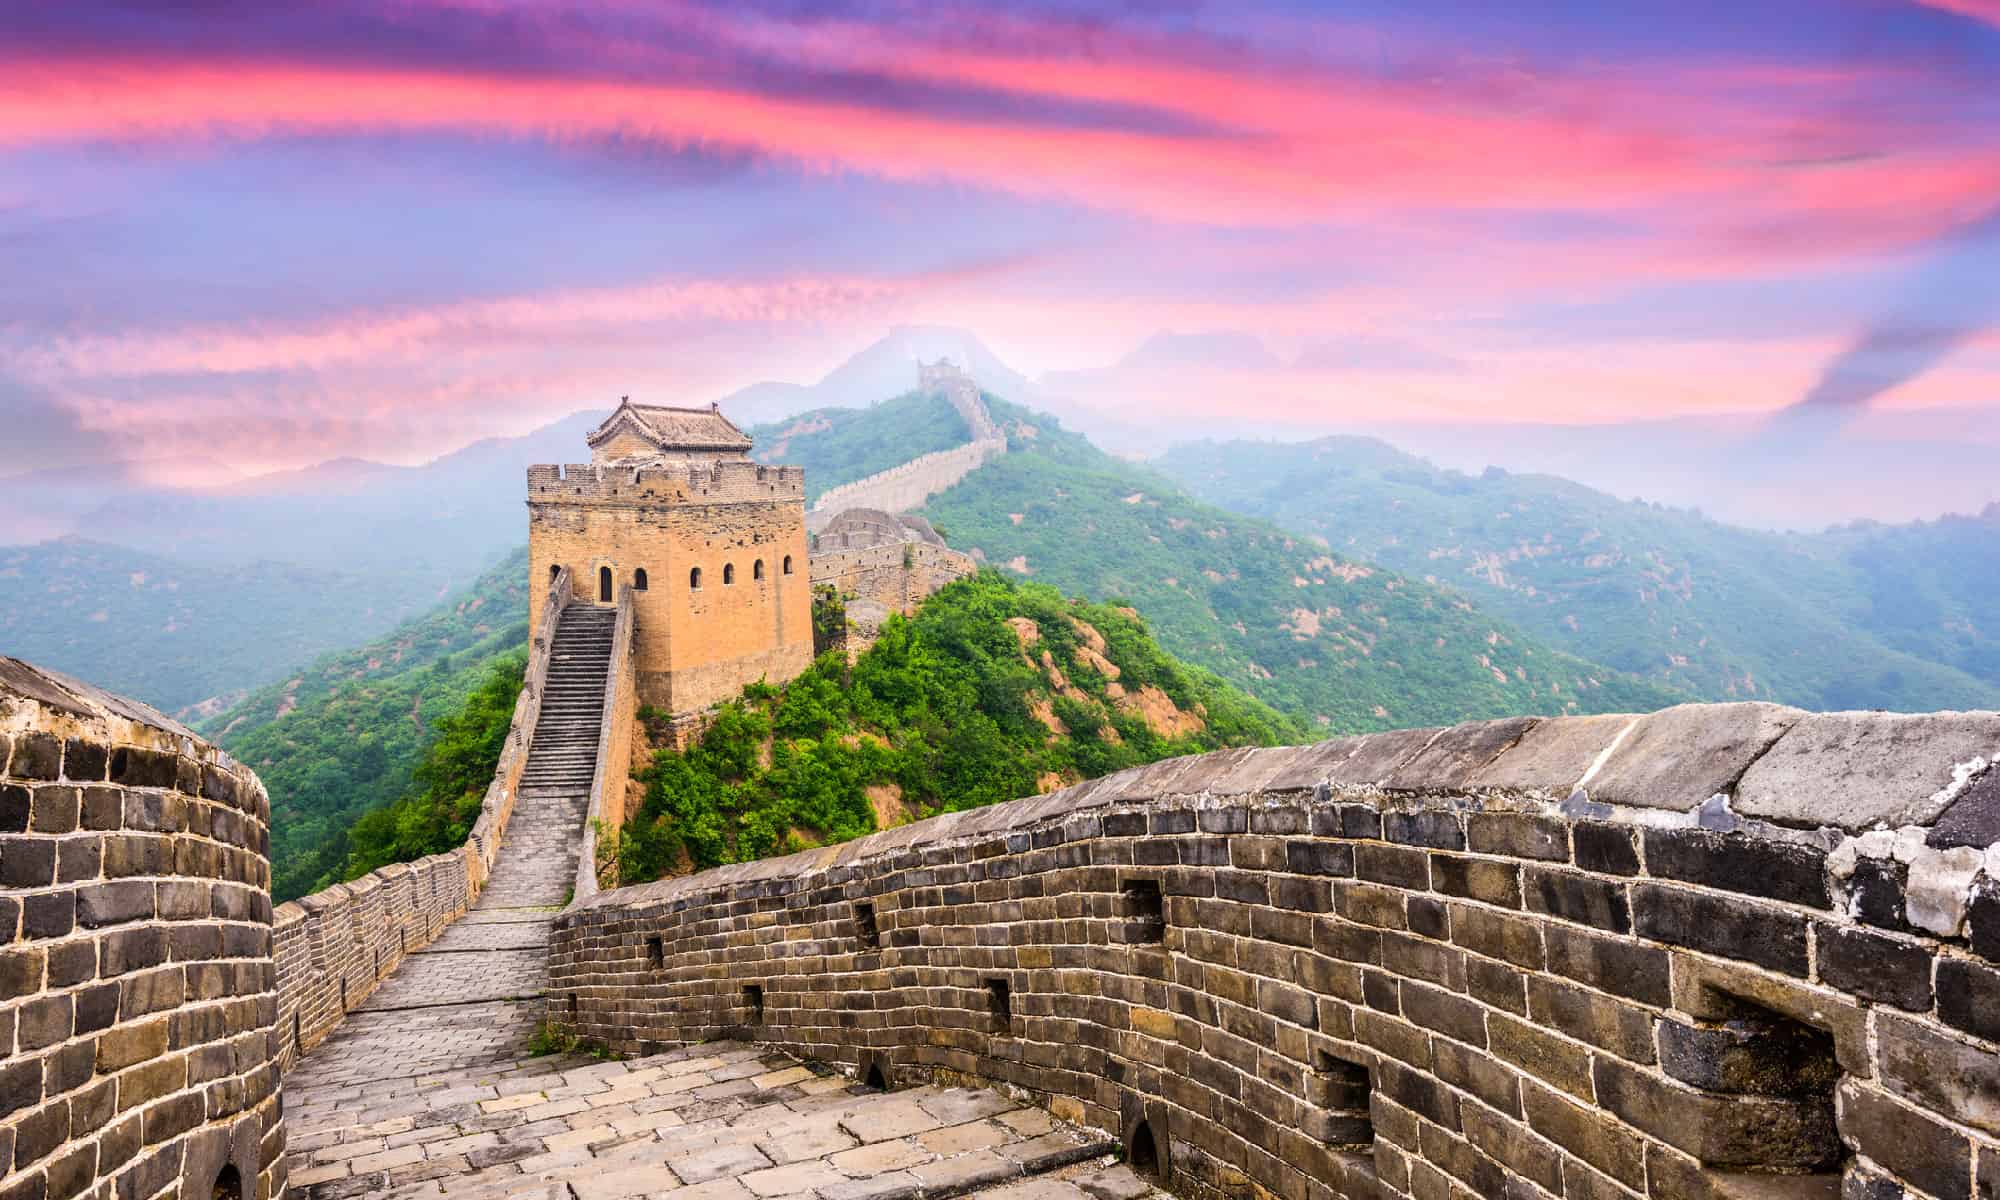 <p>Over 10 million people visit the Great Wall of <a href="https://a-z-animals.com/animals/location/asia/china/?utm_campaign=msn&utm_source=msn_slideshow&utm_content=1325965&utm_medium=in_content">China</a> each year. In 220 B.C. a series of wall sections were joined together to protect southern China from the north, and work continued on the Great Wall until 1644's Ming Dynasty ended. At that time, it was the biggest military structure anywhere in the world. Recent archaeological digs have discovered it's 13,000 miles long! It's possible to walk some sections of the wall, but it would take over a year to walk the whole distance.</p><p>Sharks, lions, alligators, and more! Don’t miss today’s latest and most exciting animal news. <strong><a href="https://www.msn.com/en-us/channel/source/AZ%20Animals%20US/sr-vid-7etr9q8xun6k6508c3nufaum0de3dqktiq6h27ddeagnfug30wka">Click here to access the A-Z Animals profile page</a> and be sure to hit the <em>Follow</em> button here or at the top of this article!</strong></p> <p>Have feedback? Add a comment below!</p>